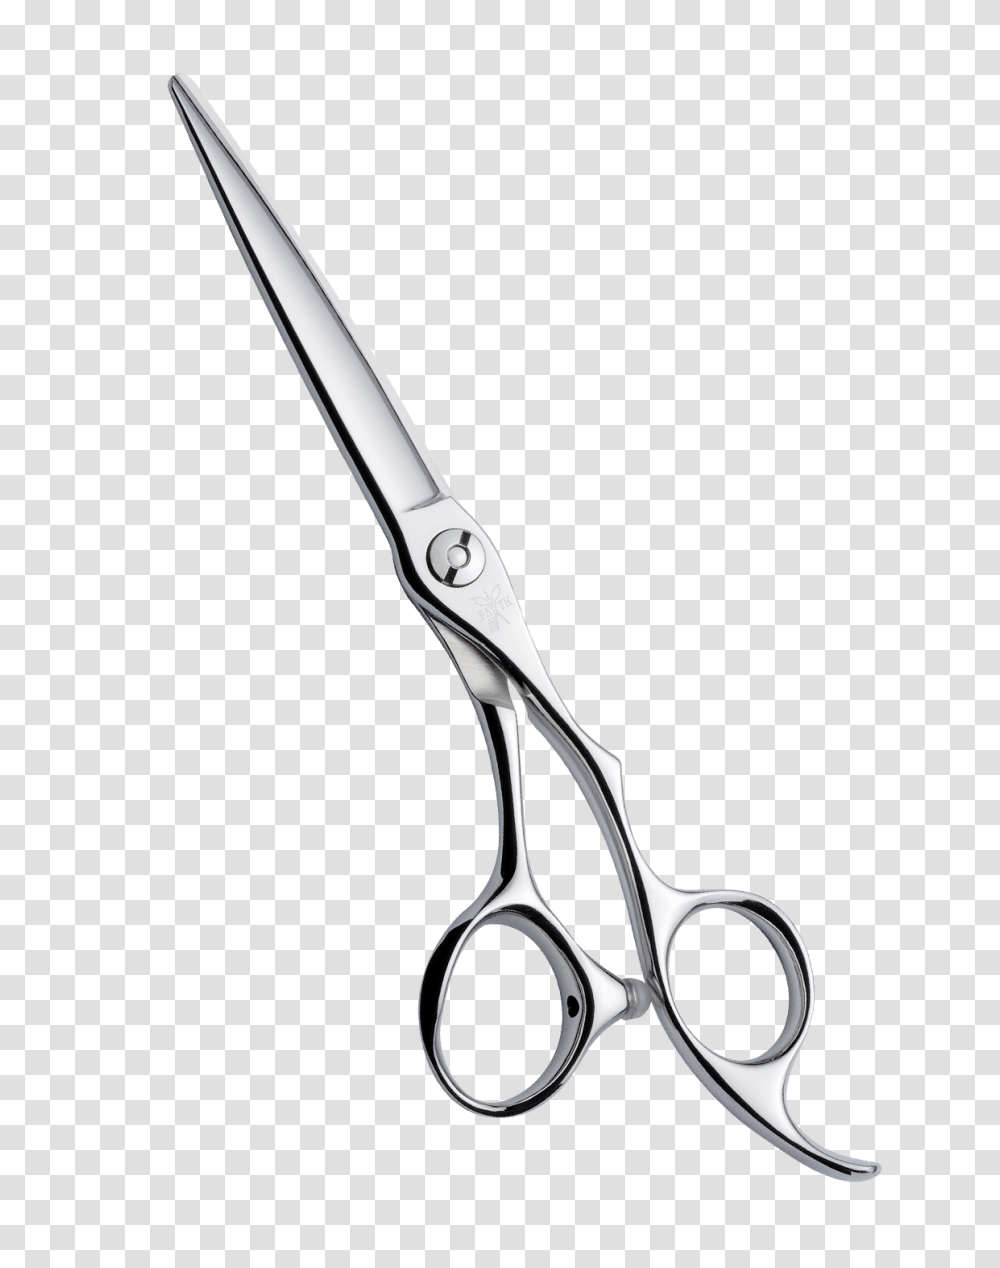 Barber Scissors Clip Art, Weapon, Weaponry, Blade, Shears Transparent Png